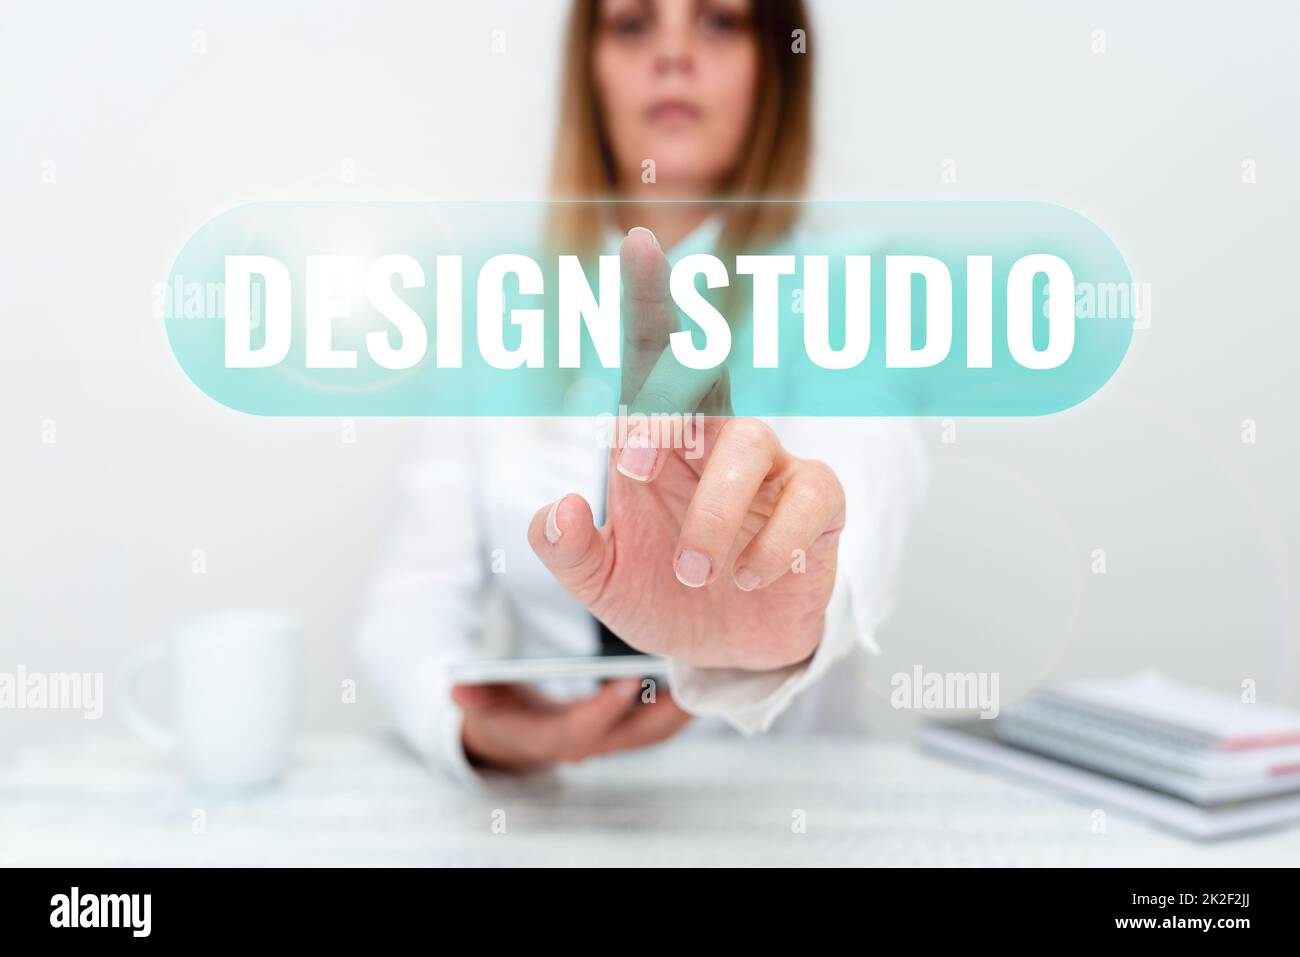 Sign displaying Design Studio. Business idea workplace for designers and artisans engaged in conceiving Developer Discussing Gadget Upgrade, Presenting Technical Specs Stock Photo